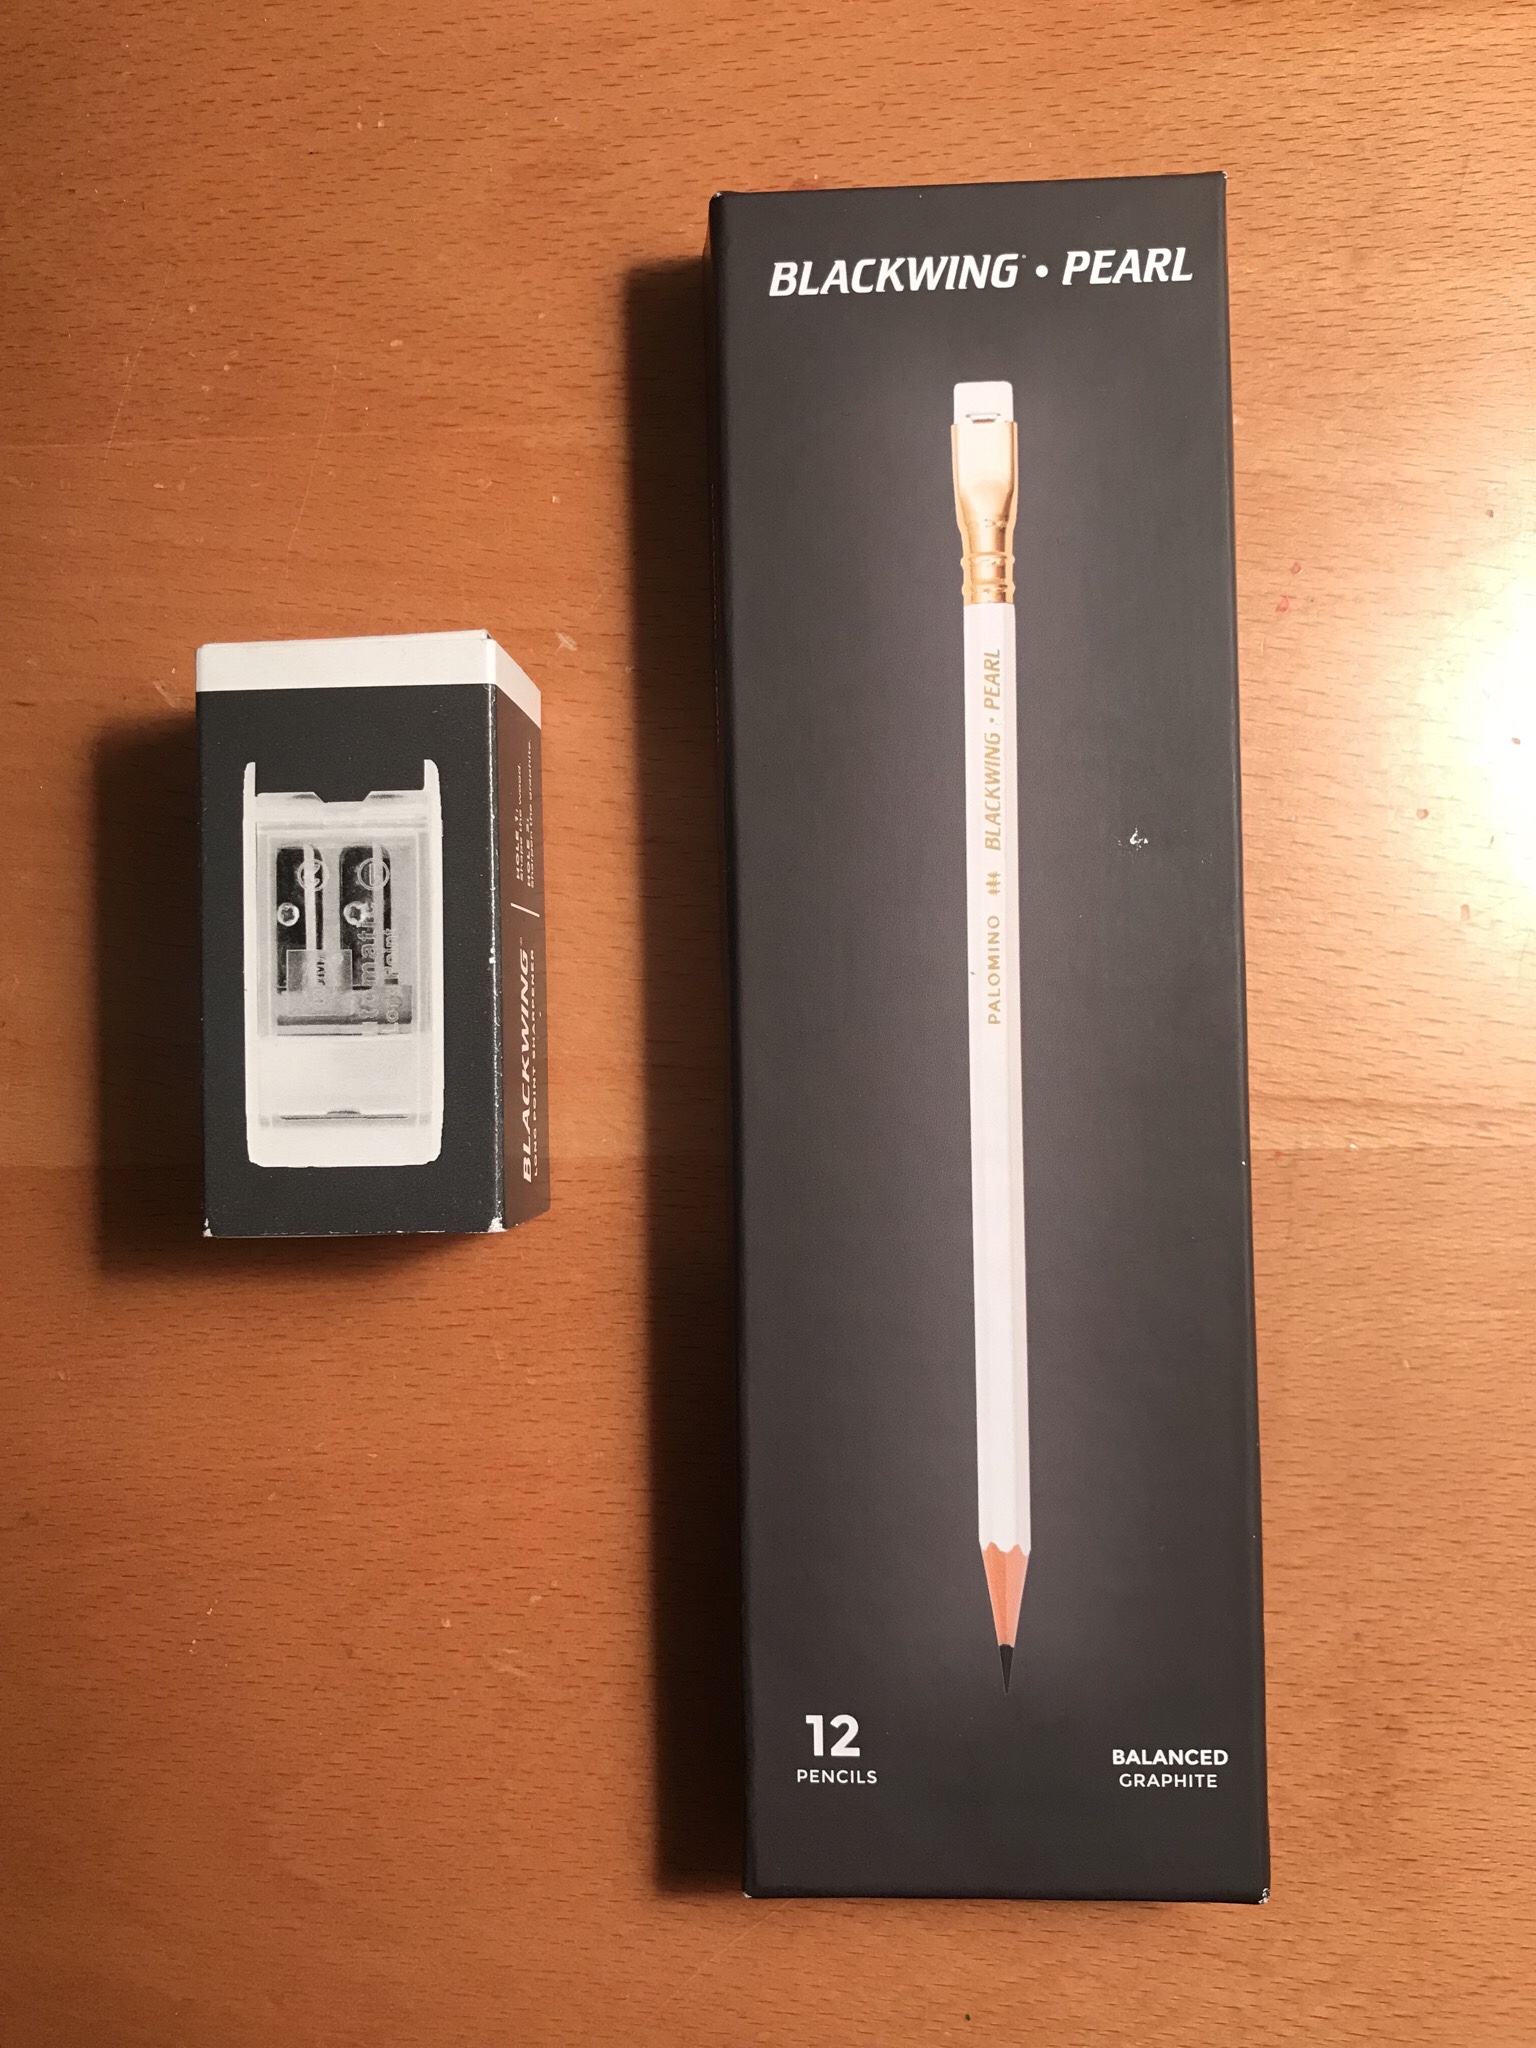 Palomino Blackwing - The worlds most famous pencil (12 pack